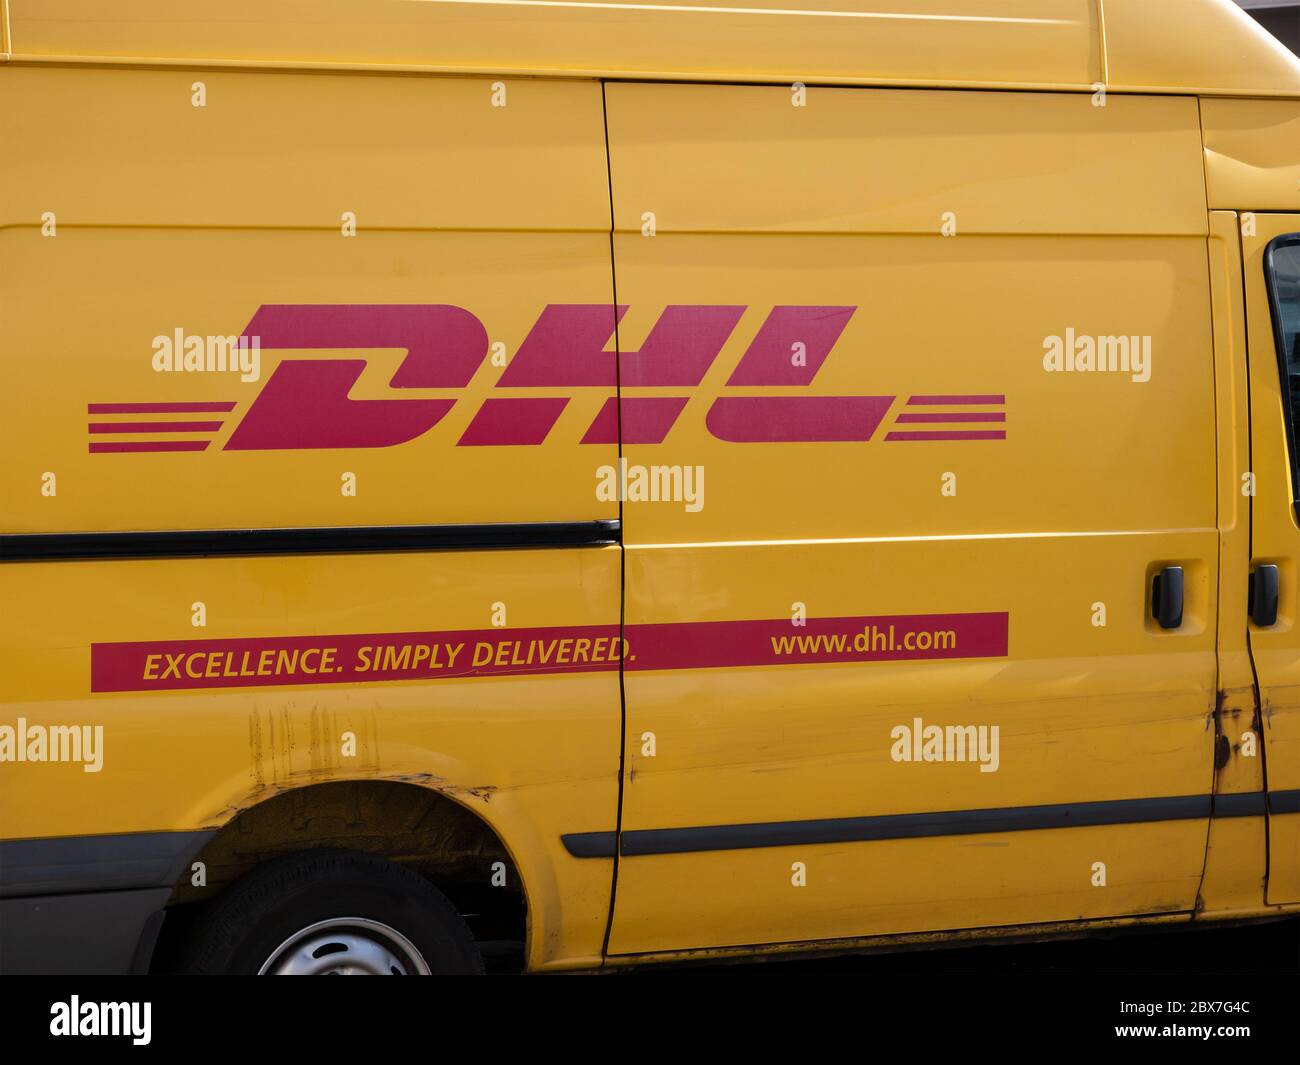 BERLIN, GERMANY - JUNE 4, 2020: Small Truck of Package Delivery Company DHL With English Slogan In Berlin, Germany Stock Photo